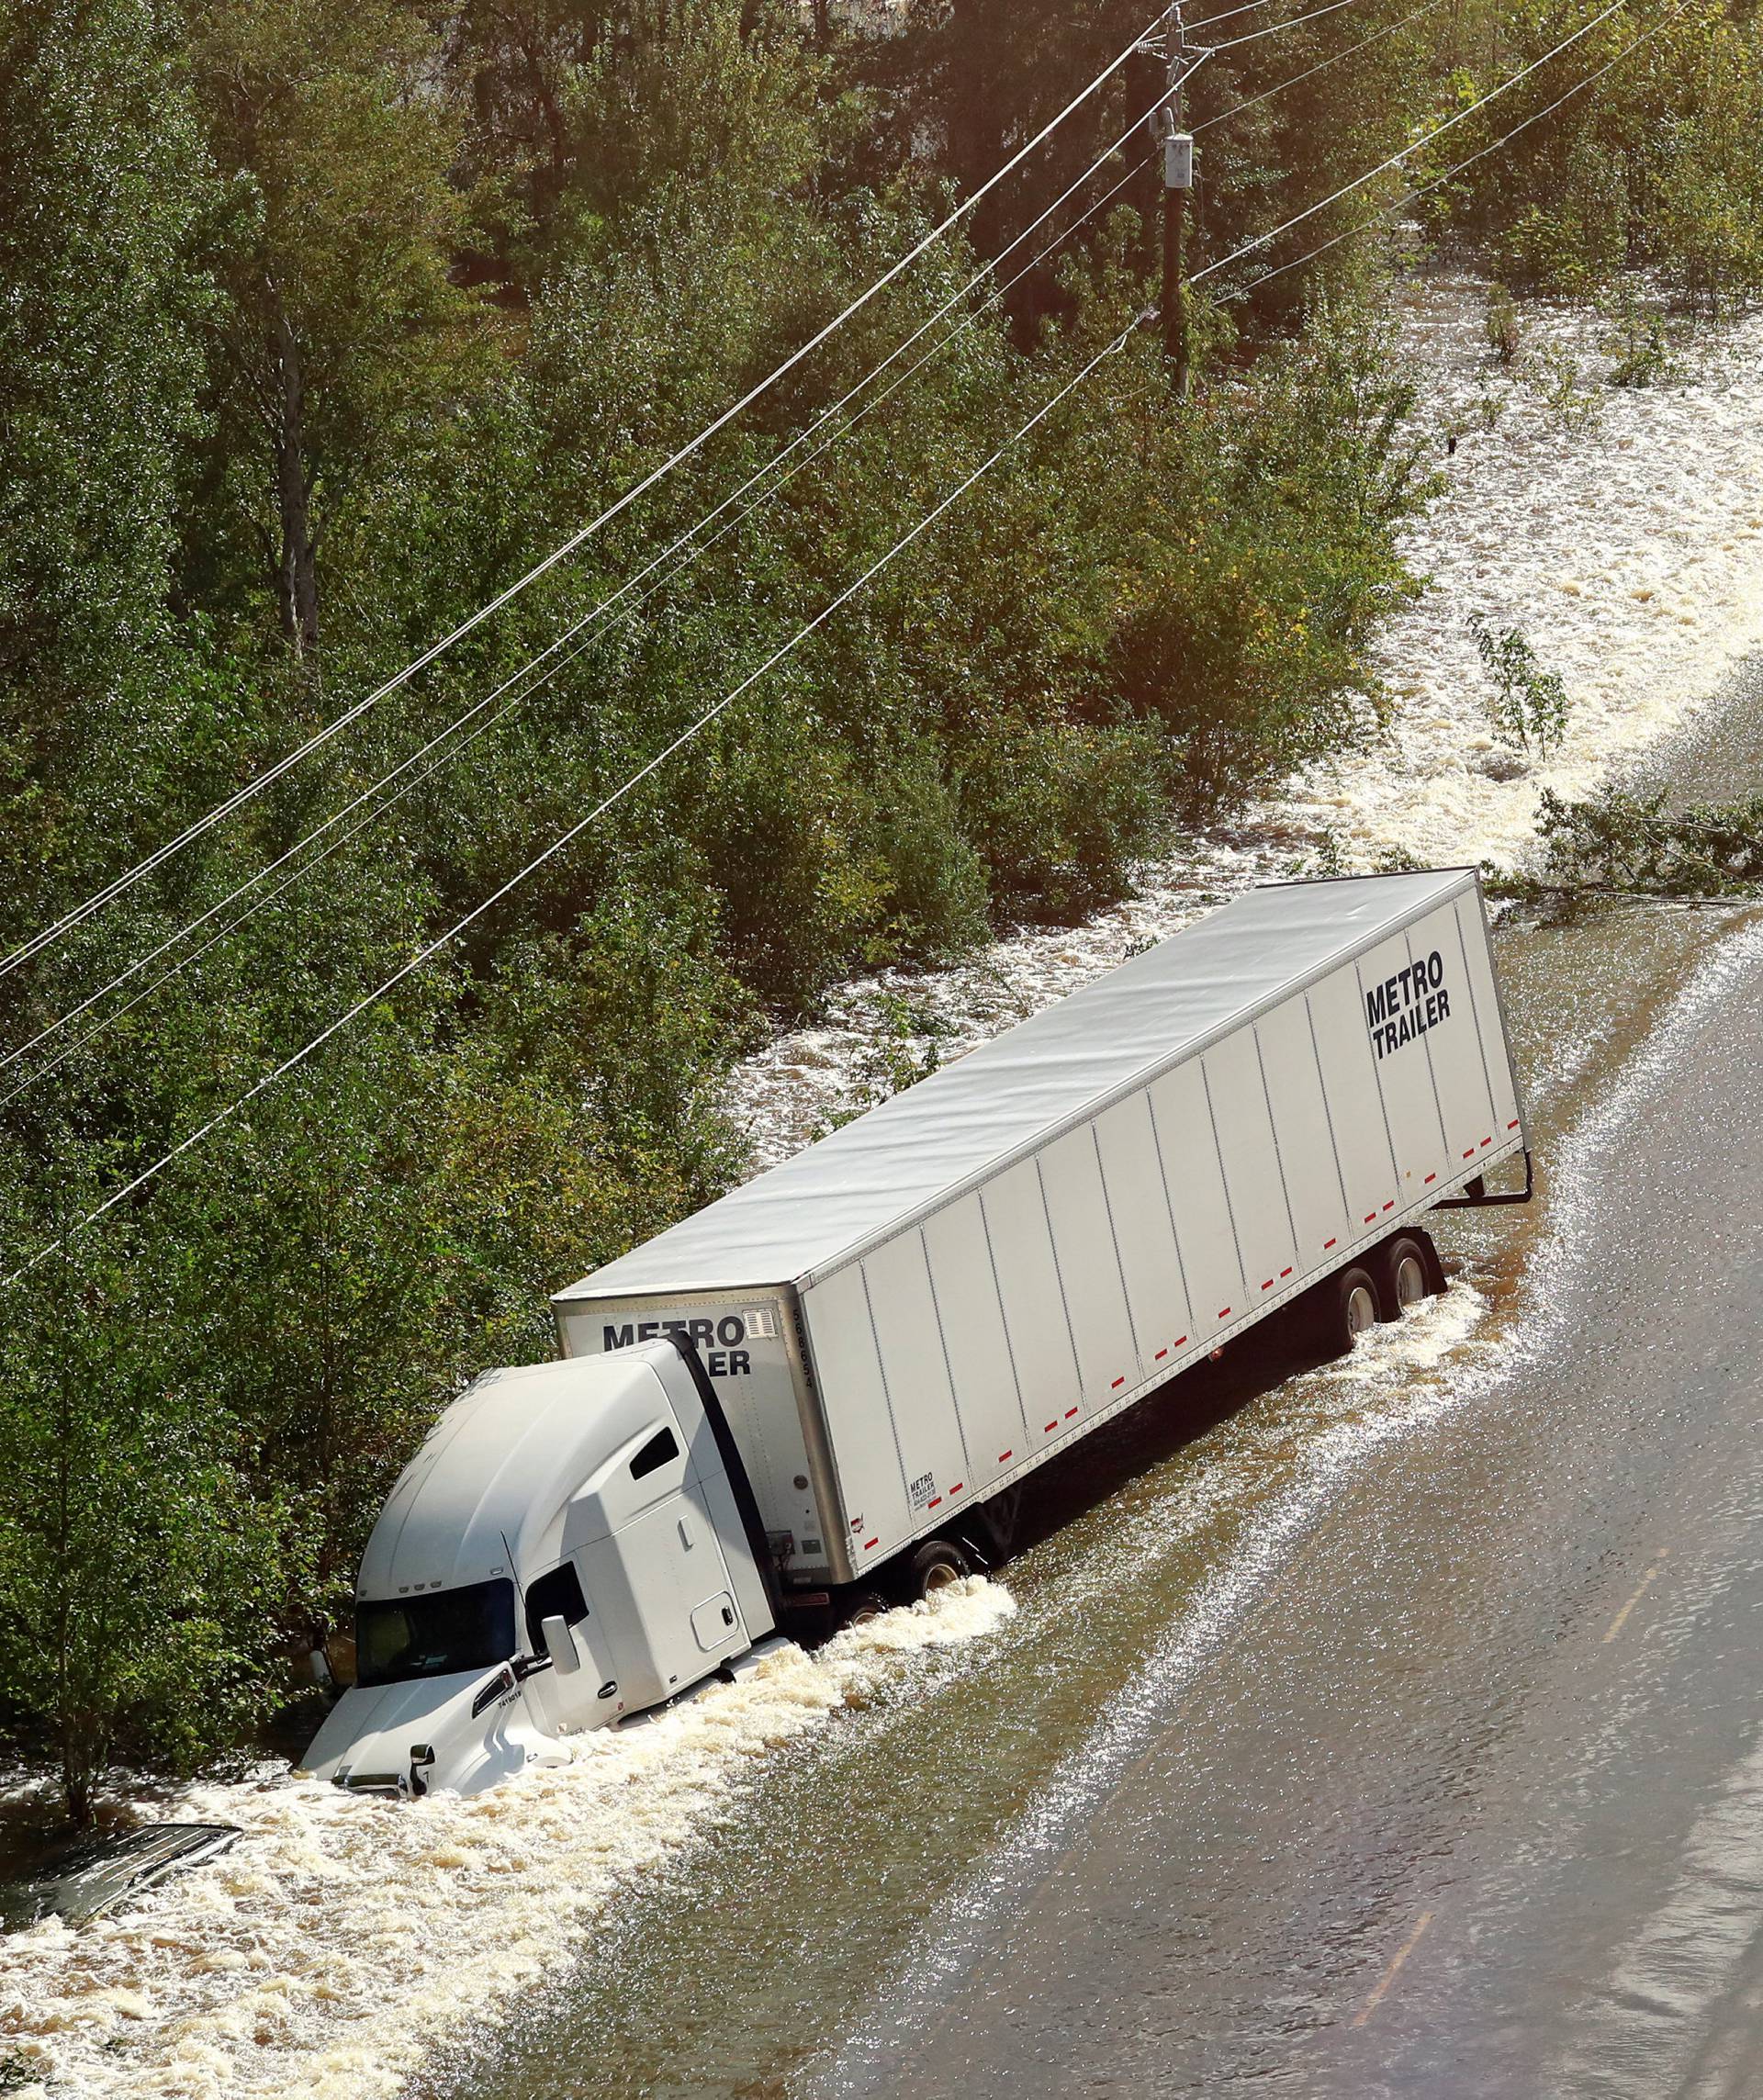 A tractor trailer sits on its side after being washed over Route 301 from flood waters caused by Hurricane Florence near Dillon, South Carolina